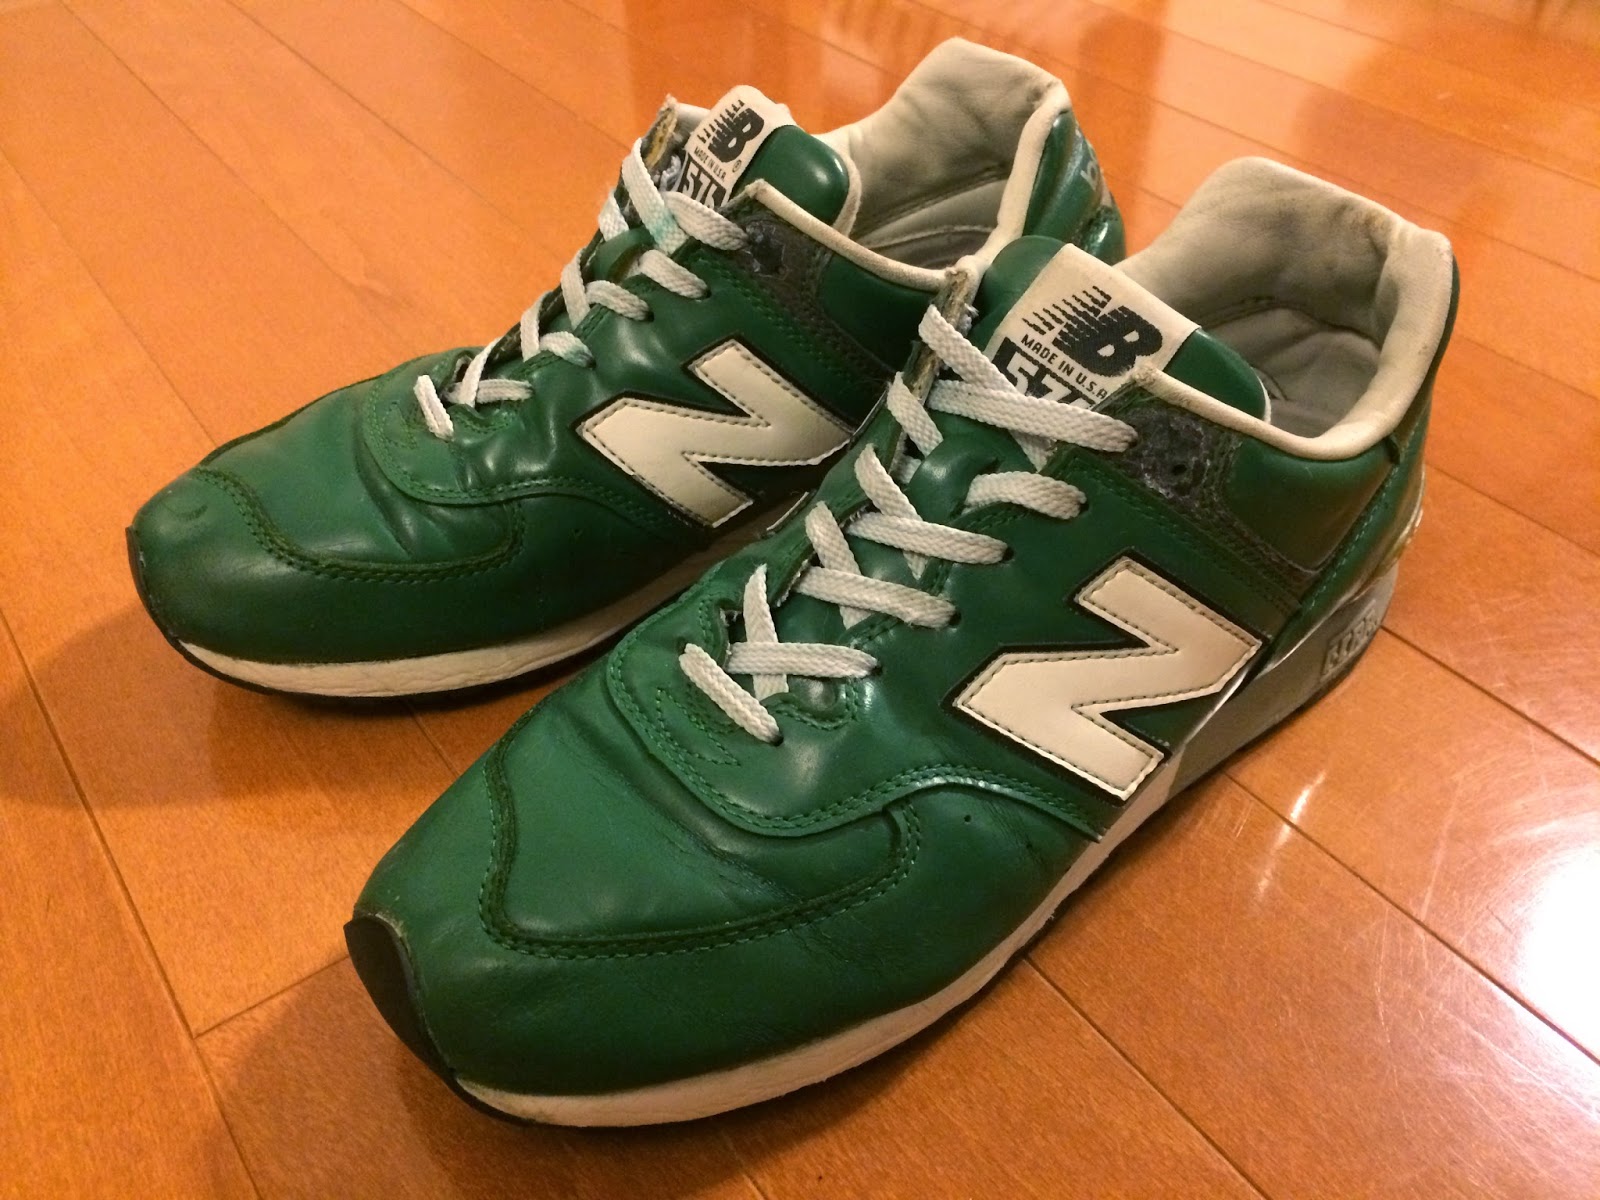 Body Movin': New Balance M576 Glass Leather Repair